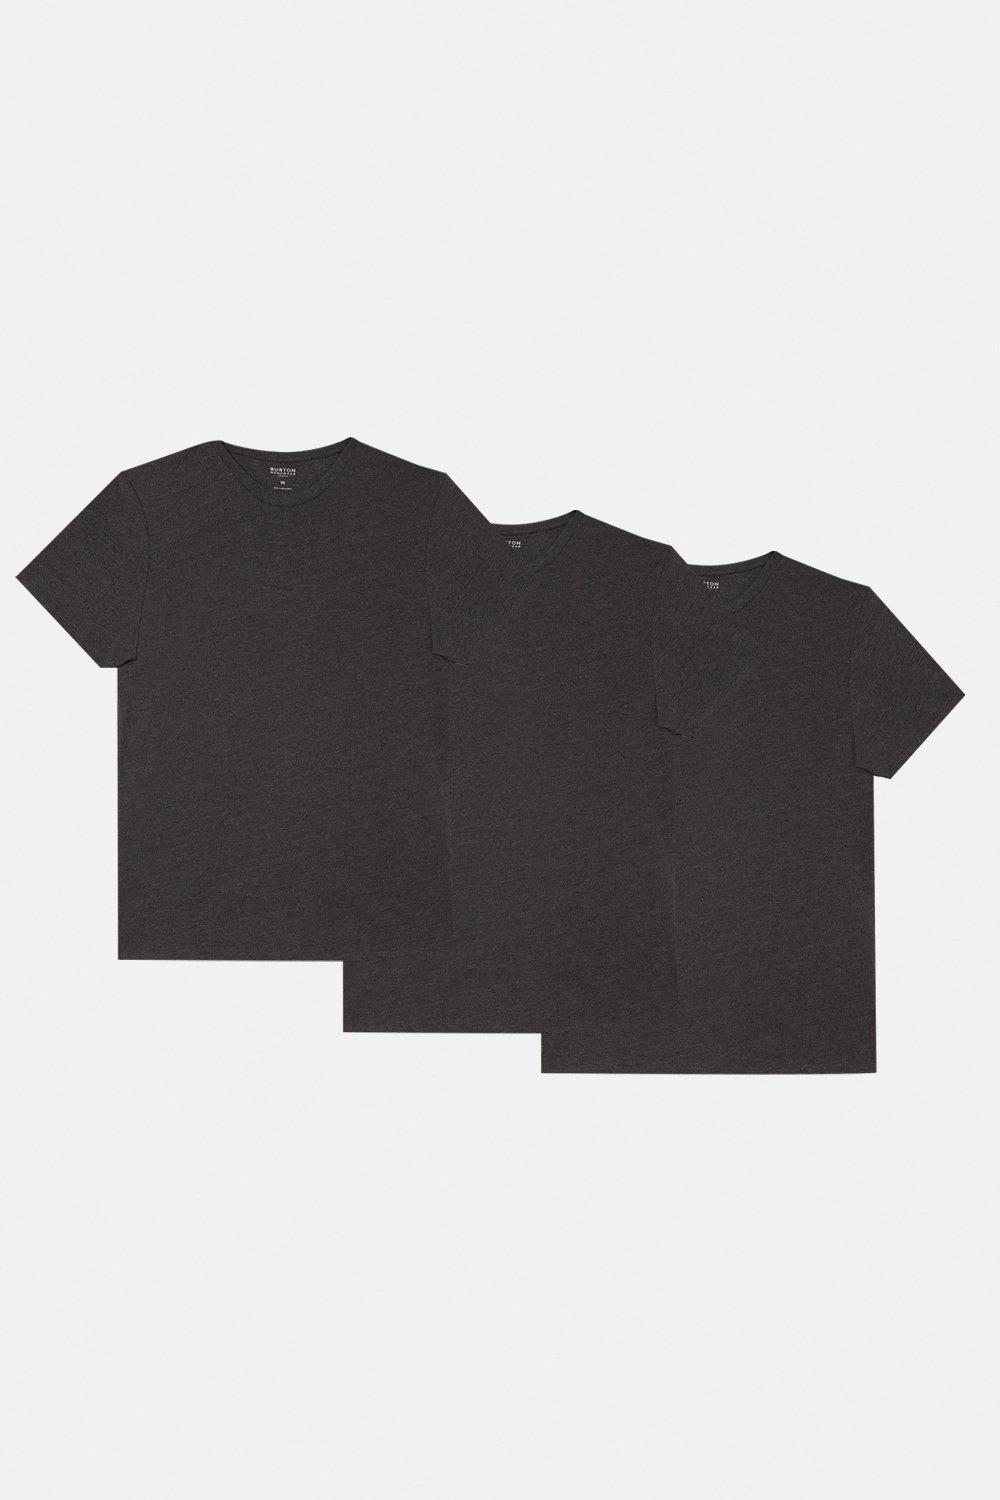 Mens 3 Pack Charcoal Crew Neck T-shirts